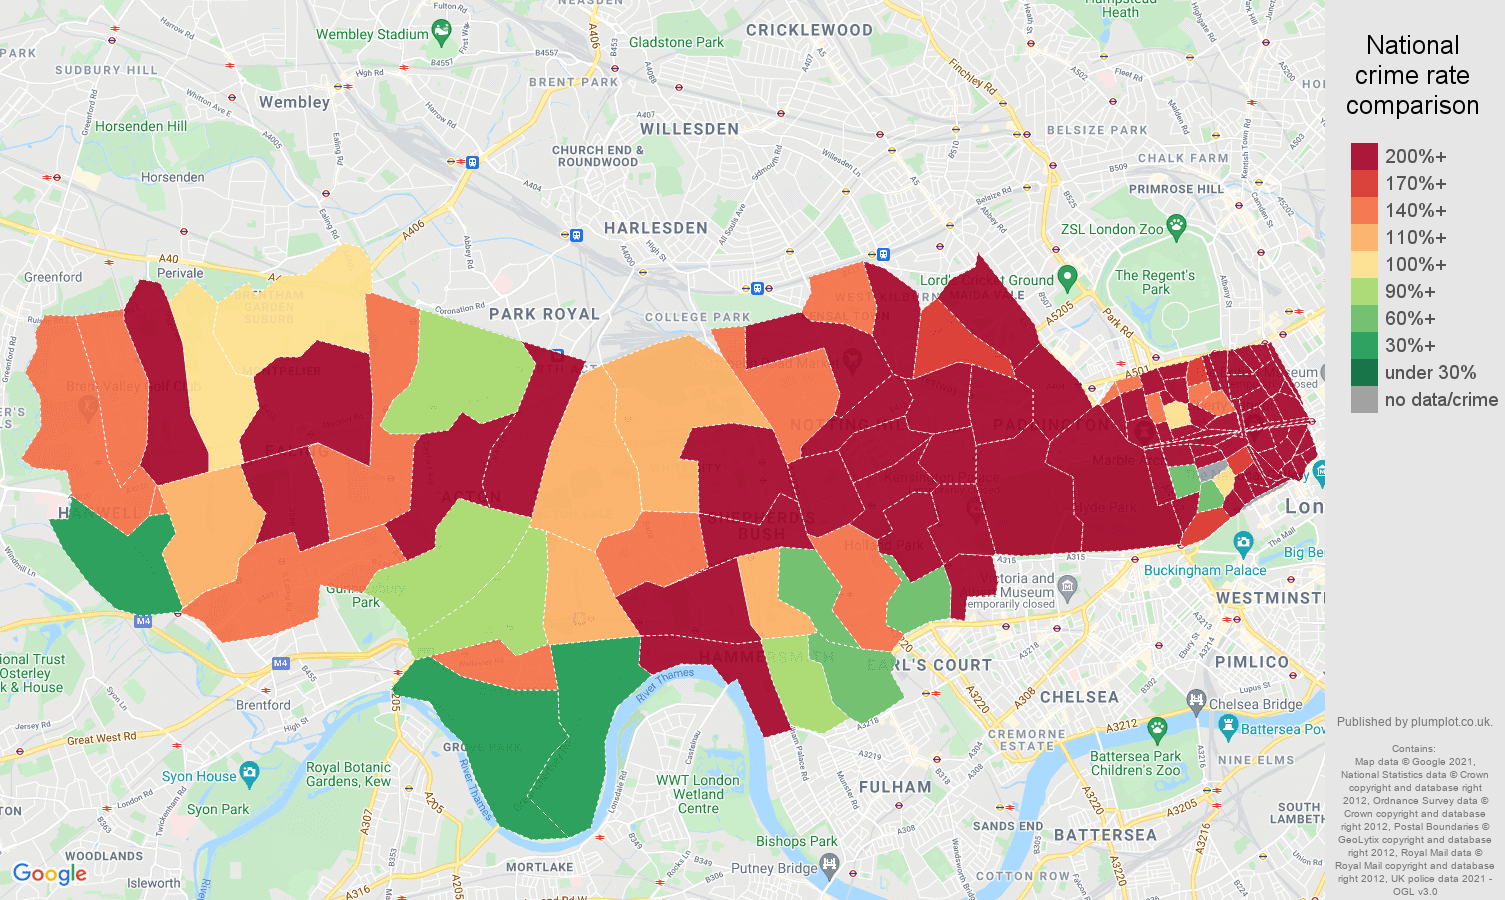 West London theft from the person crime rate comparison map